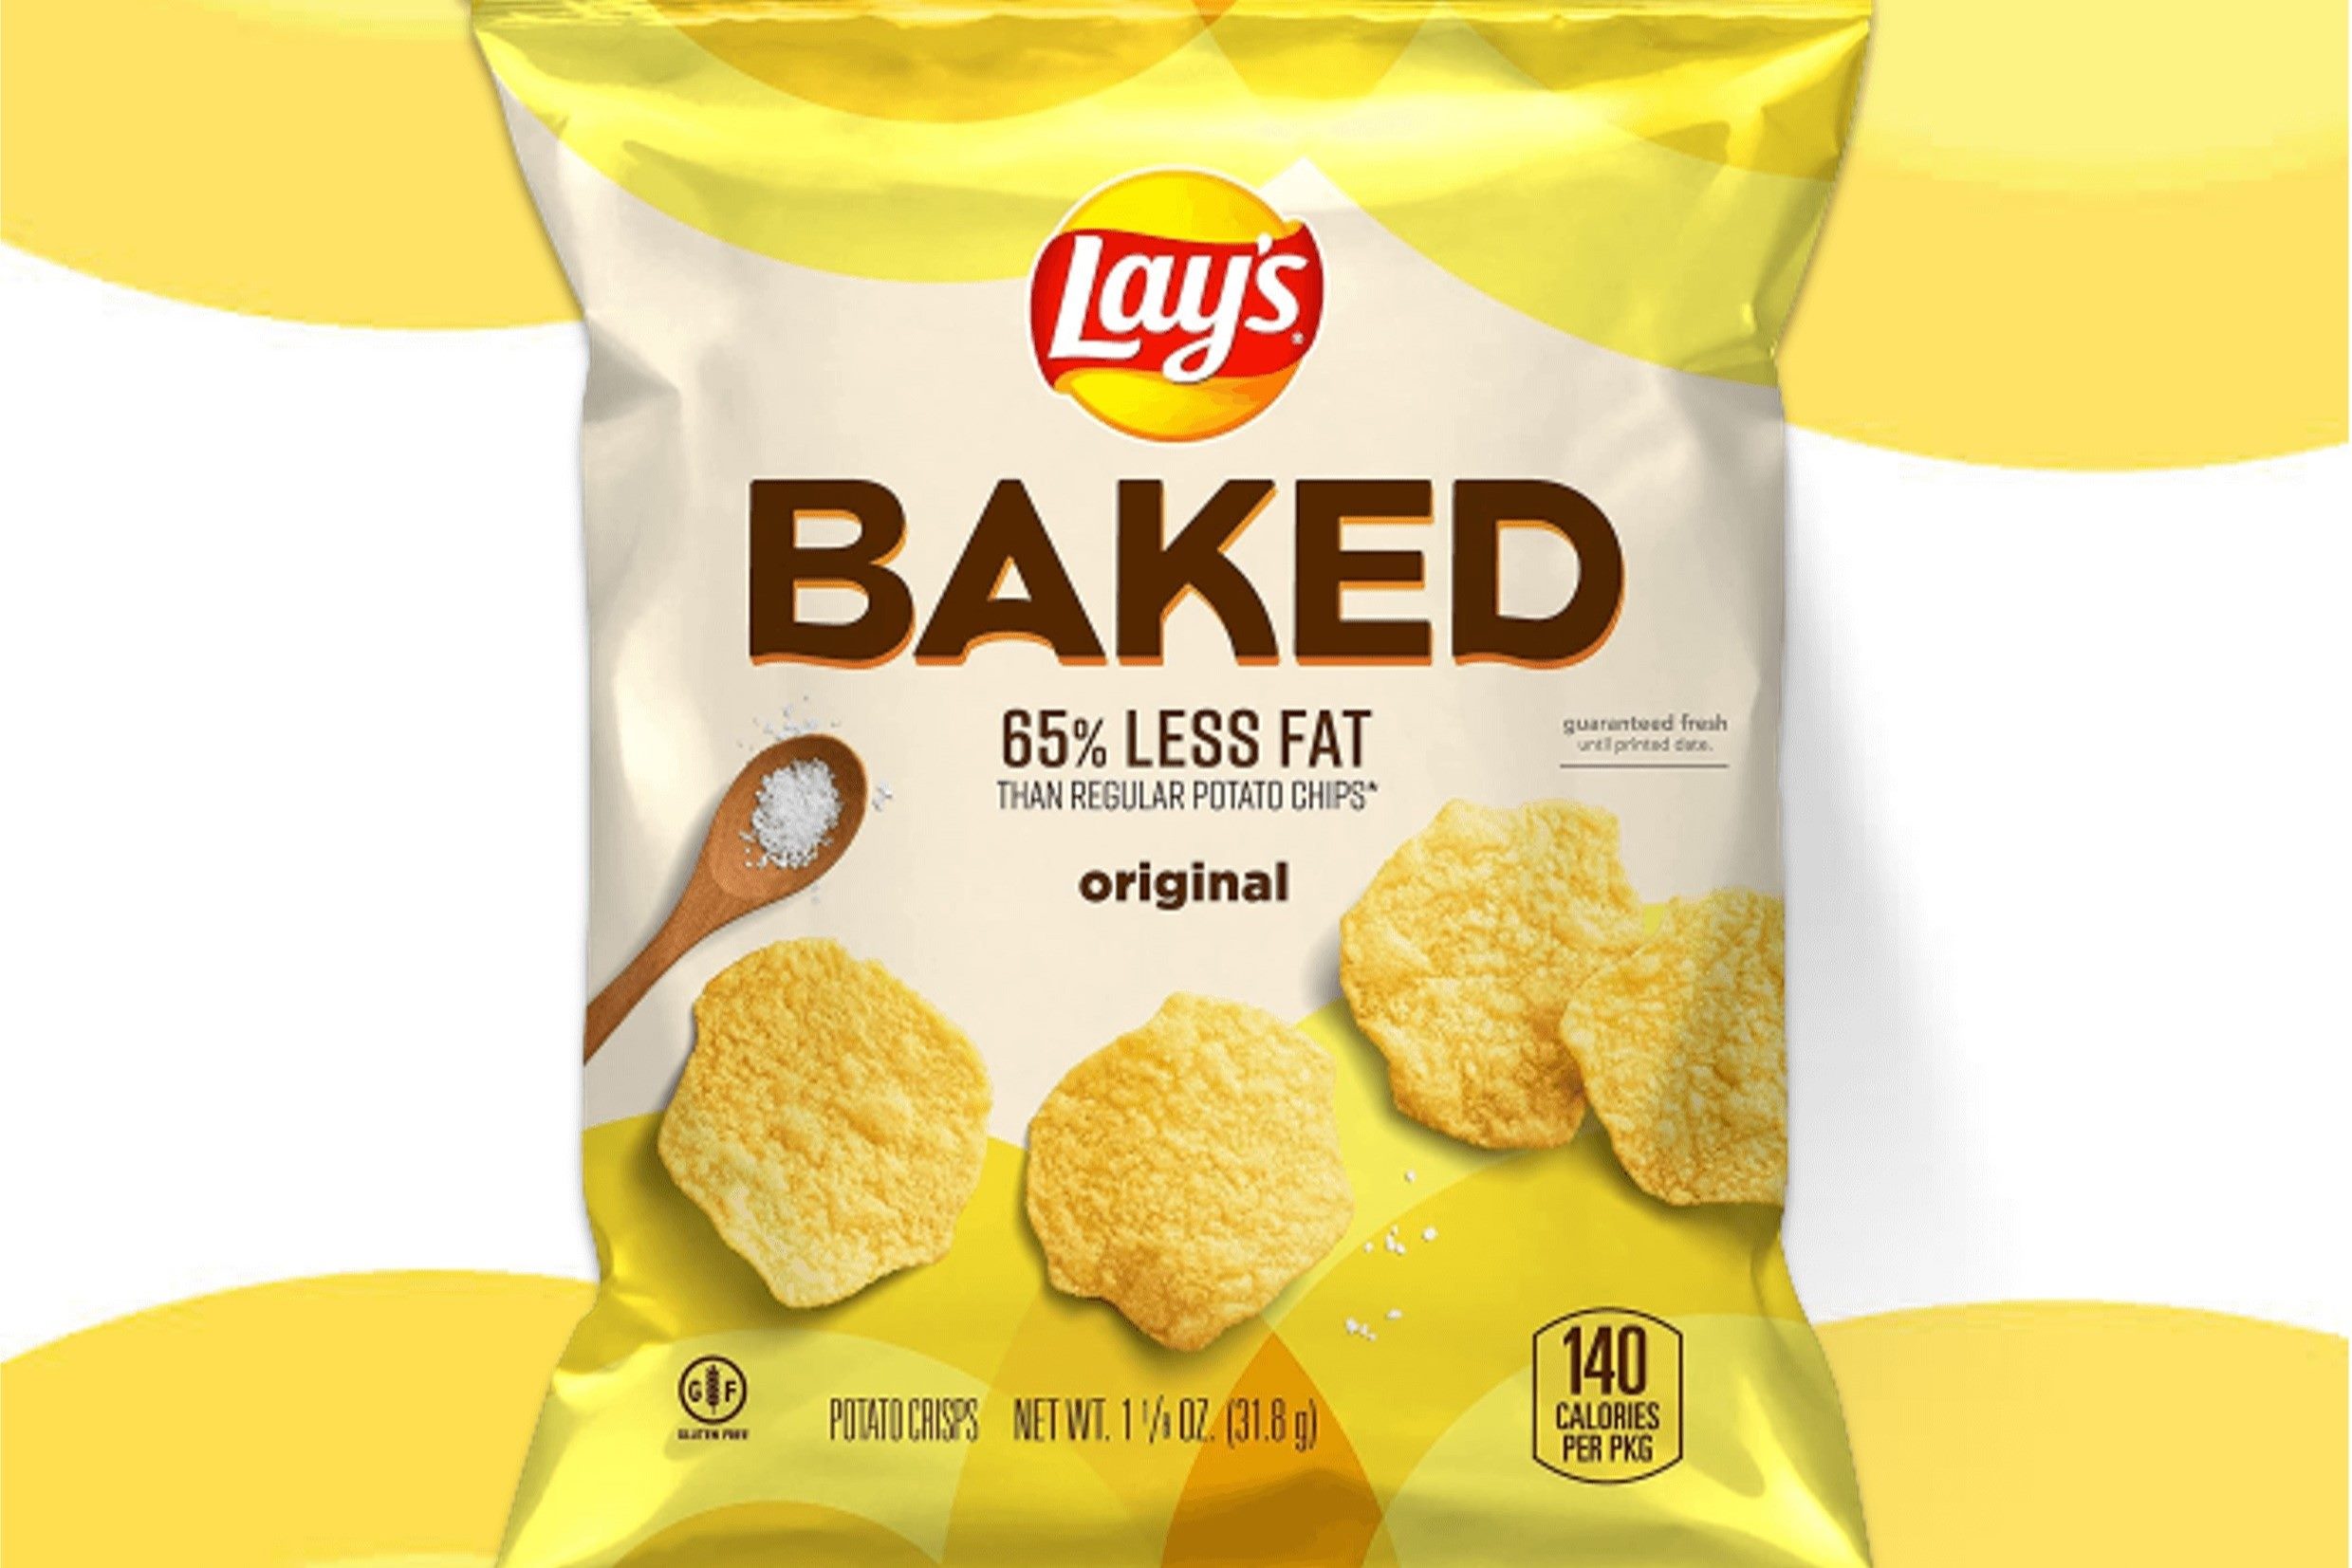 15-baked-lays-nutrition-facts